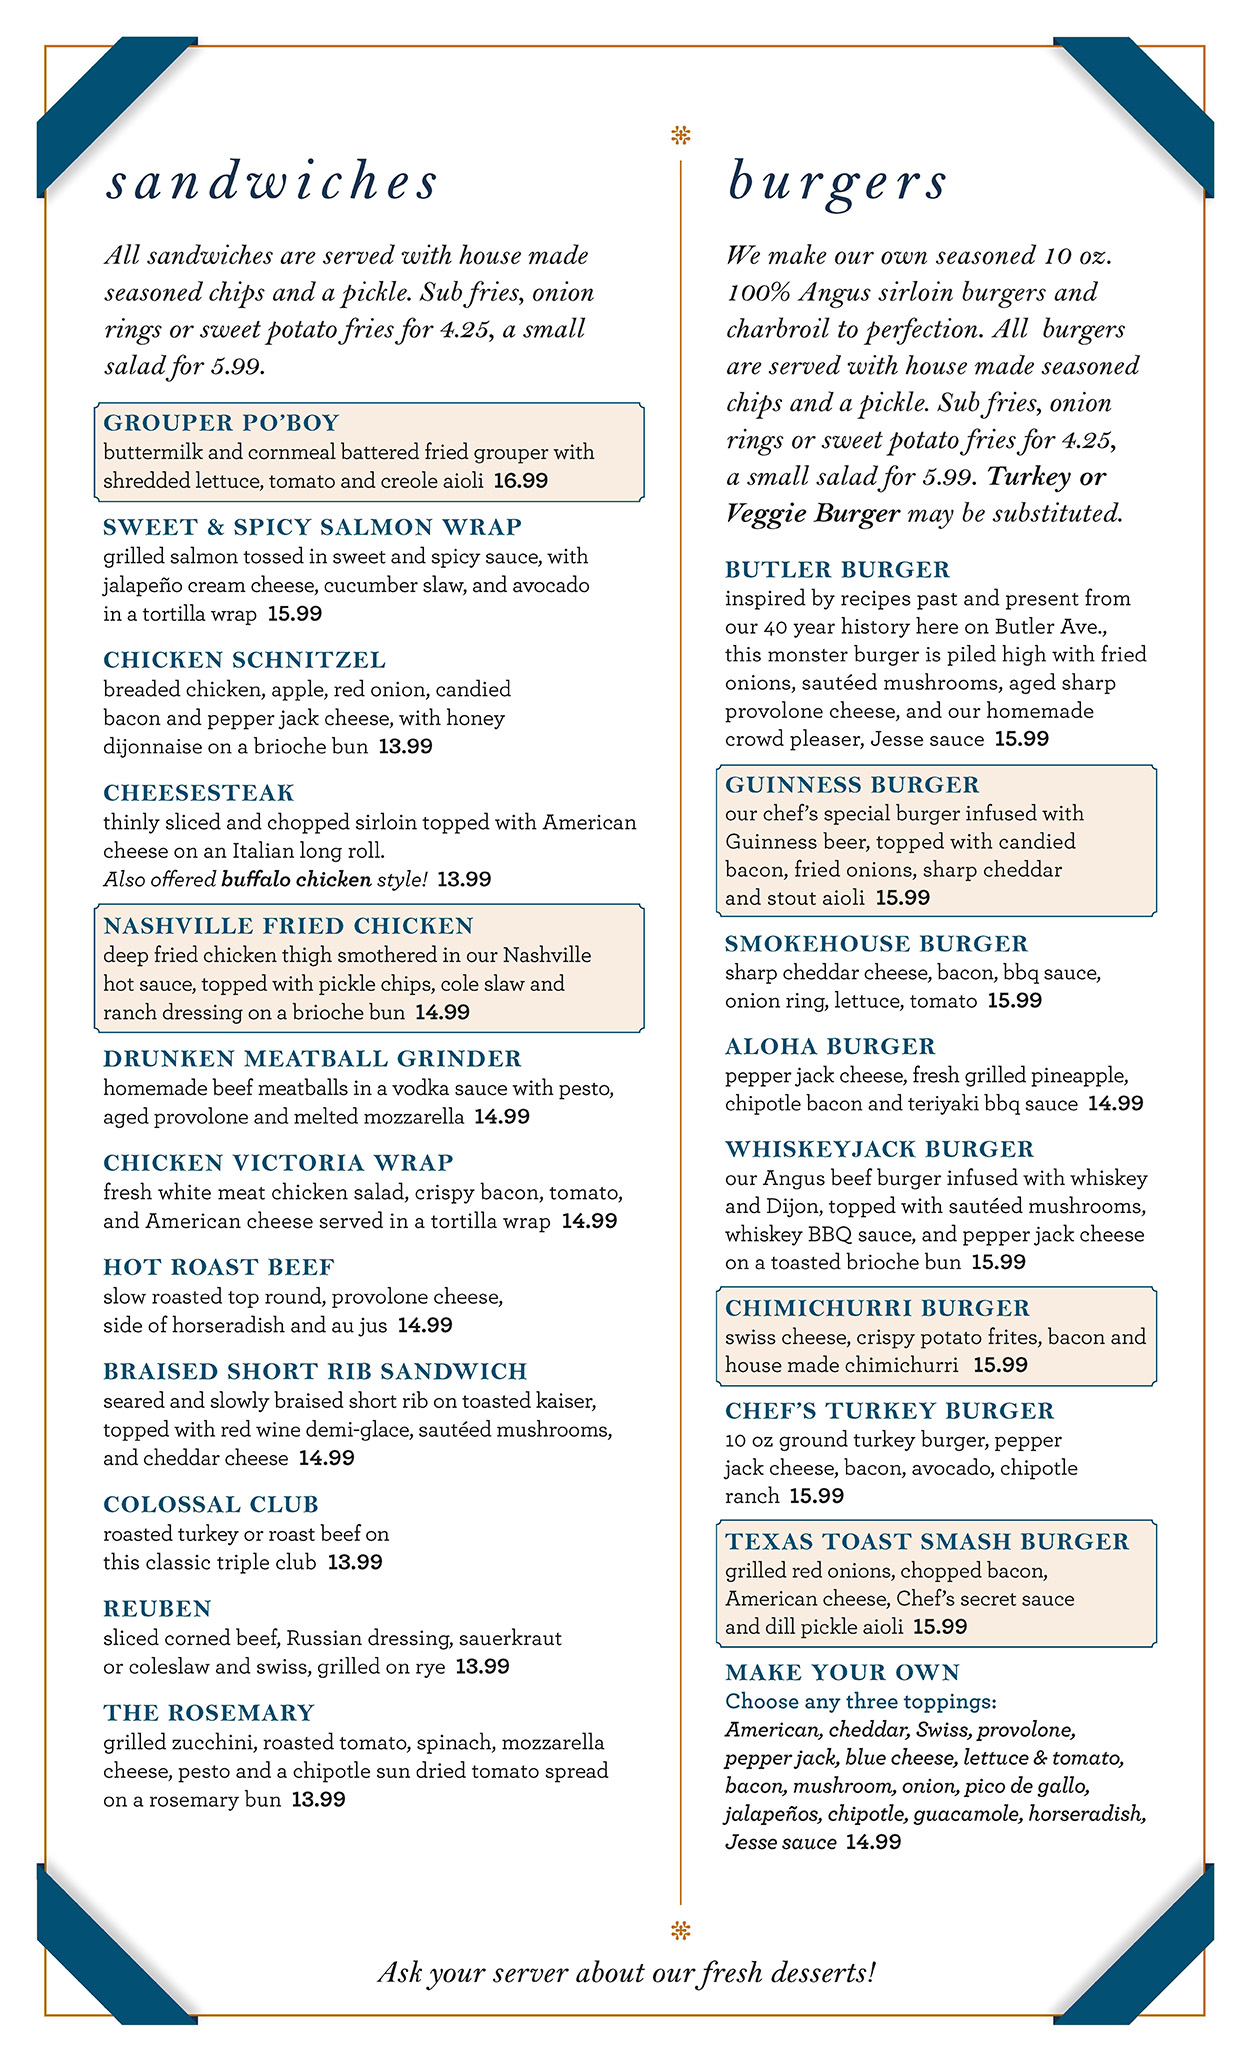 A menu listing various dishes like sandwiches, burgers, and desserts with prices, descriptions, and a blue border.